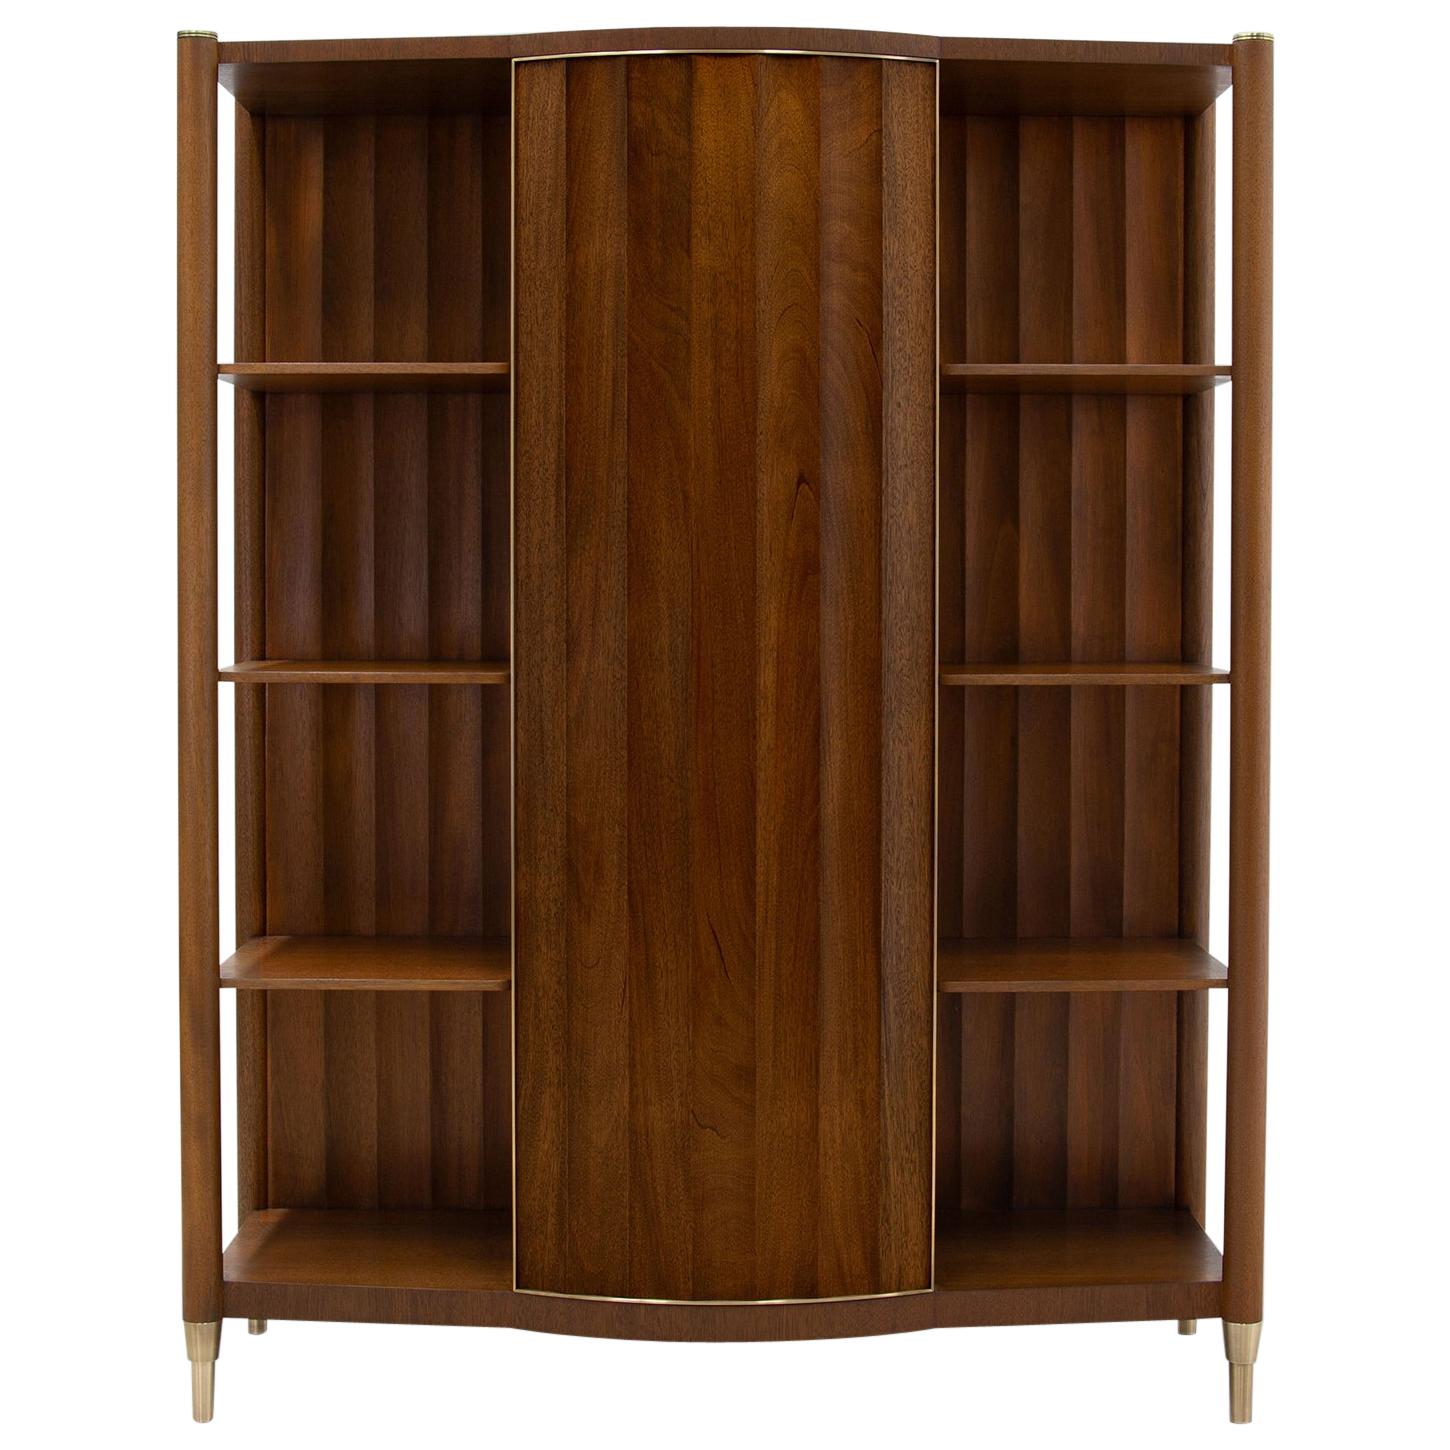  Landon Bookcase or Dry Bar in Mahogany with Brass Accents by Chapter & Verse